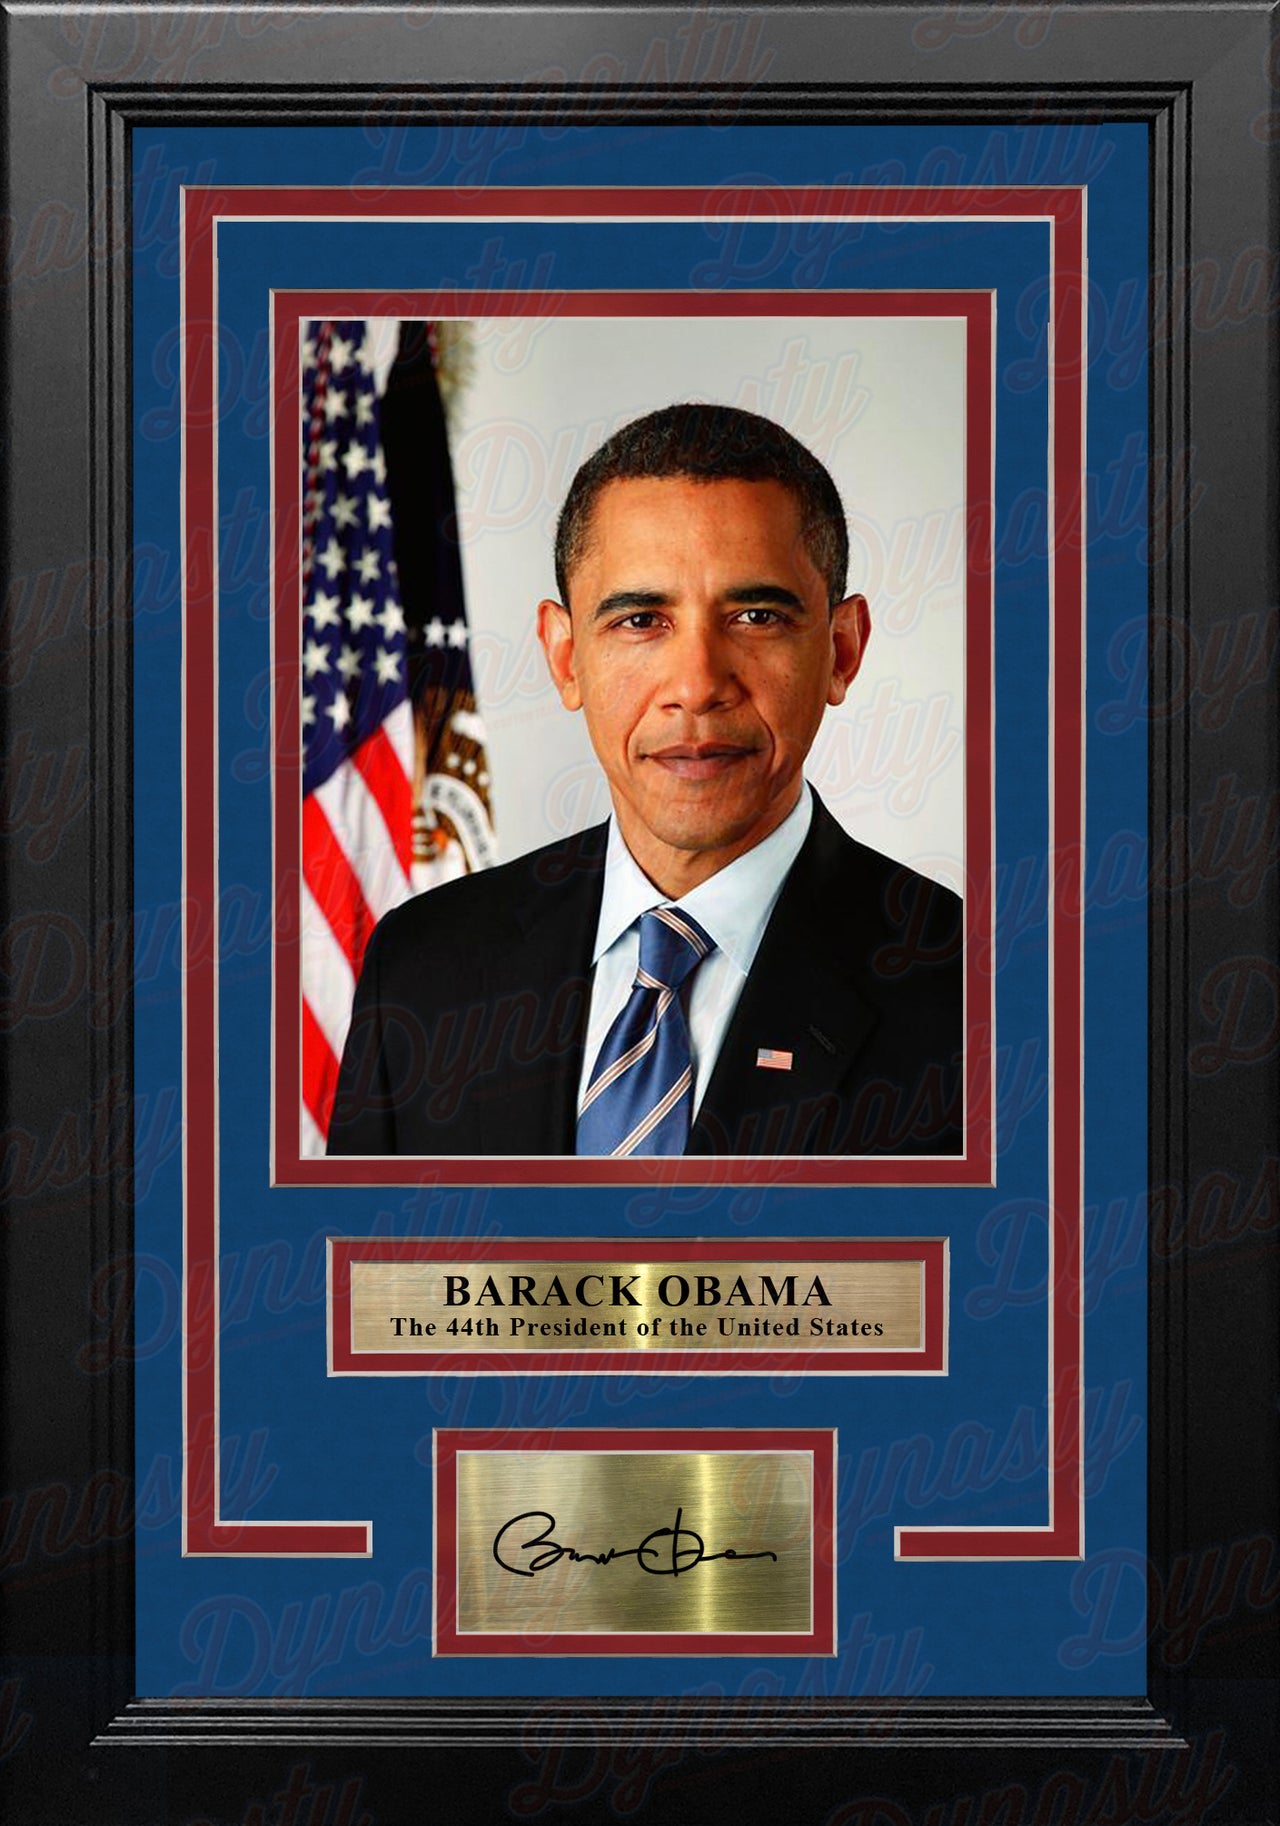 Barack Obama 44th President of the United States 8" x 10" Framed Photo with Engraved Autograph - Dynasty Sports & Framing 